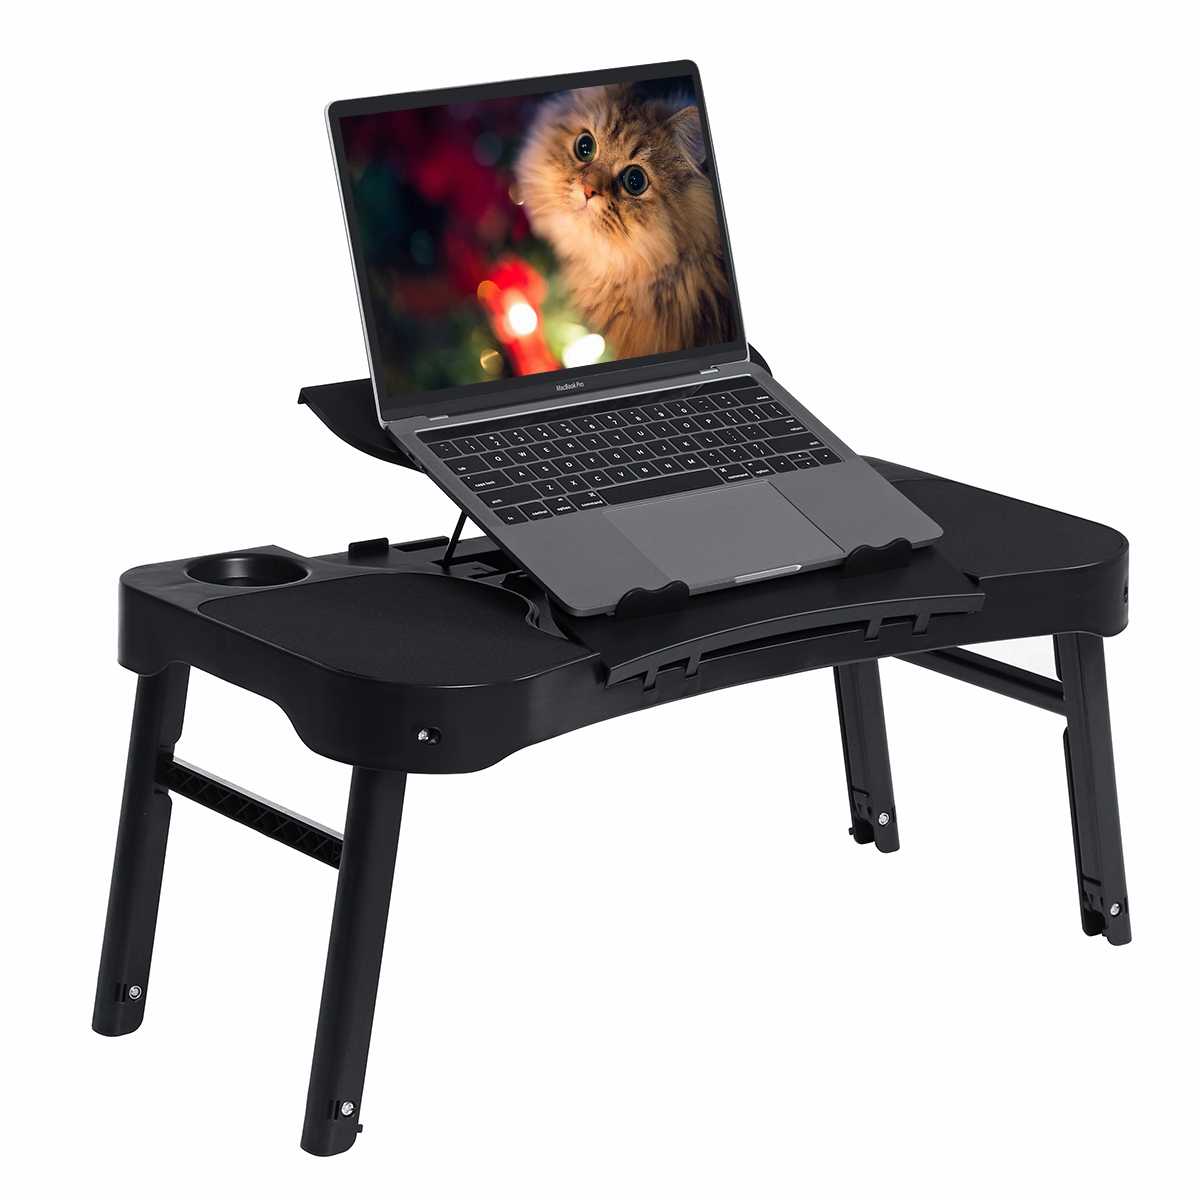 

Collapsible Laptop Desk Folding Study Table Bed Desk with Mouse Pad and USB Cooling Fan